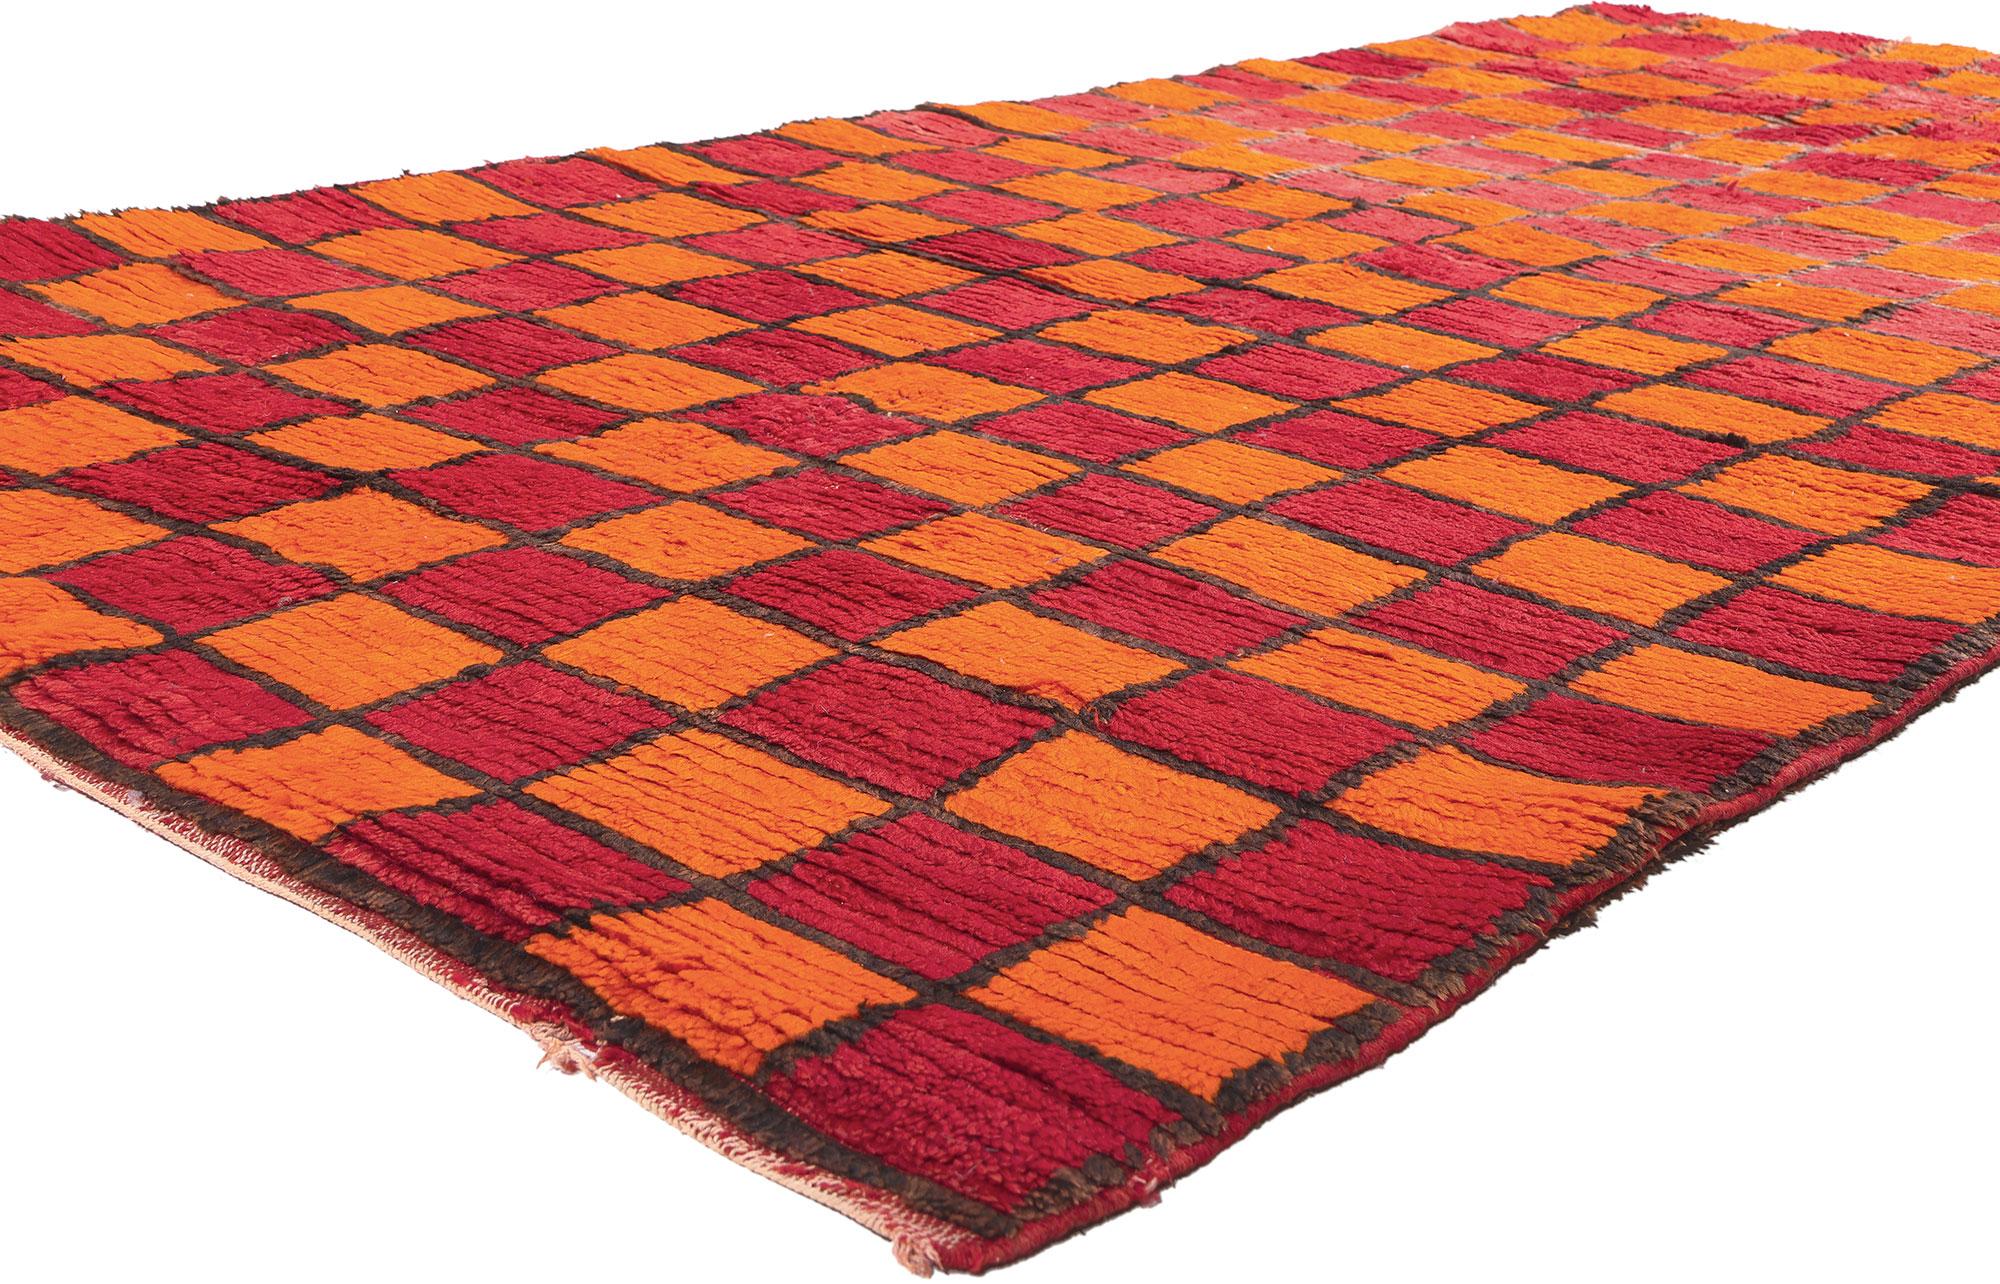 20532 Reversible Vintage Moroccan Rug, 05'02 x 09'11.
Step into the captivating vision of woven beauty with this hand-knotted wool vintage reversible Berber Moroccan rug, a testament to rugged beauty, simplicity, and bold expressive design. The